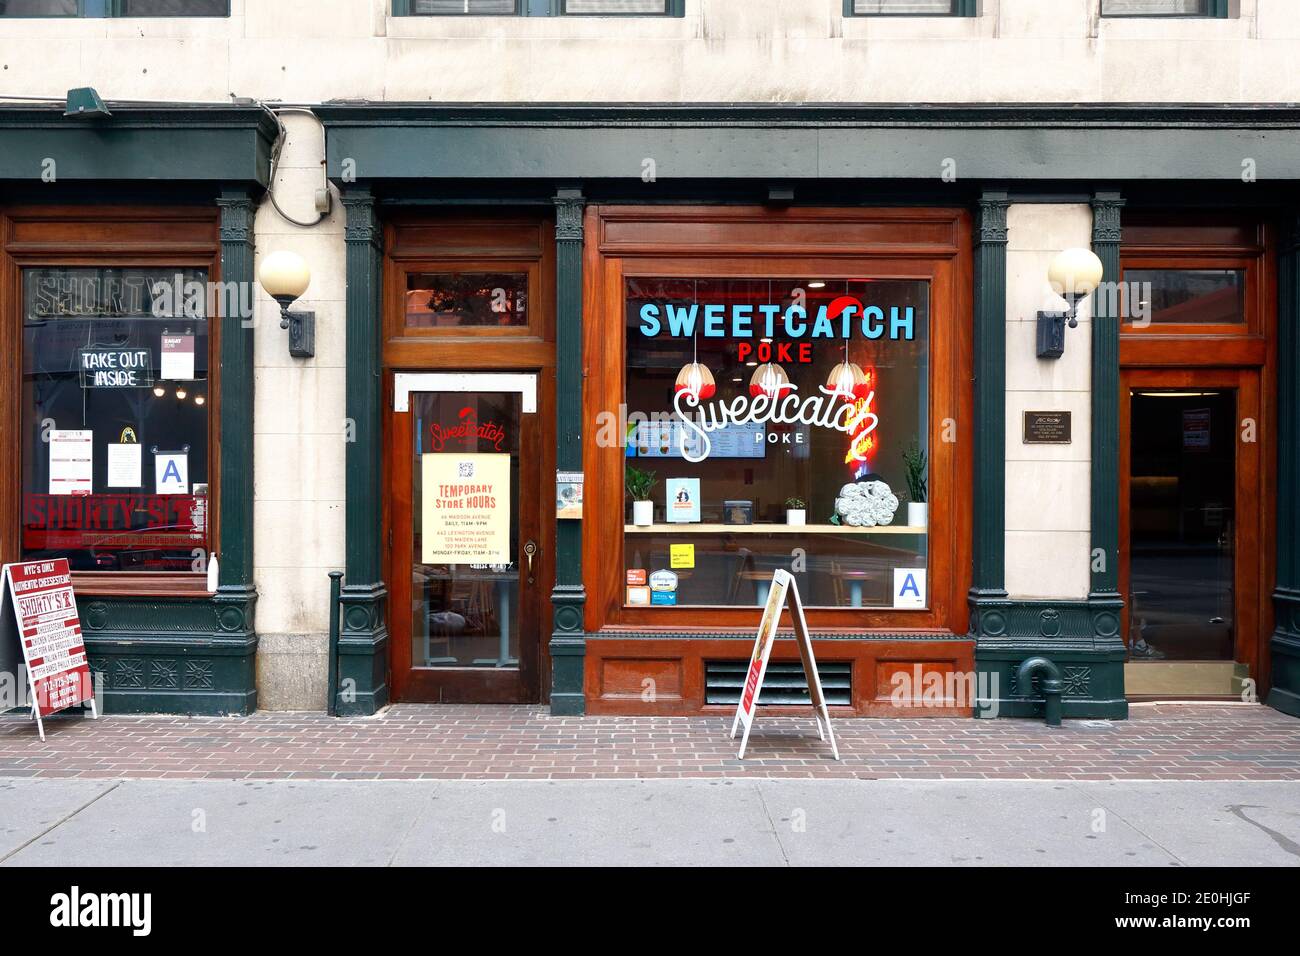 [historical storefront] Sweetcatch Poke, 66 Madison Ave, New York, NYC storefront photo of a fast casual poke bowl restaurant in Midtown Manhattan. Stock Photo